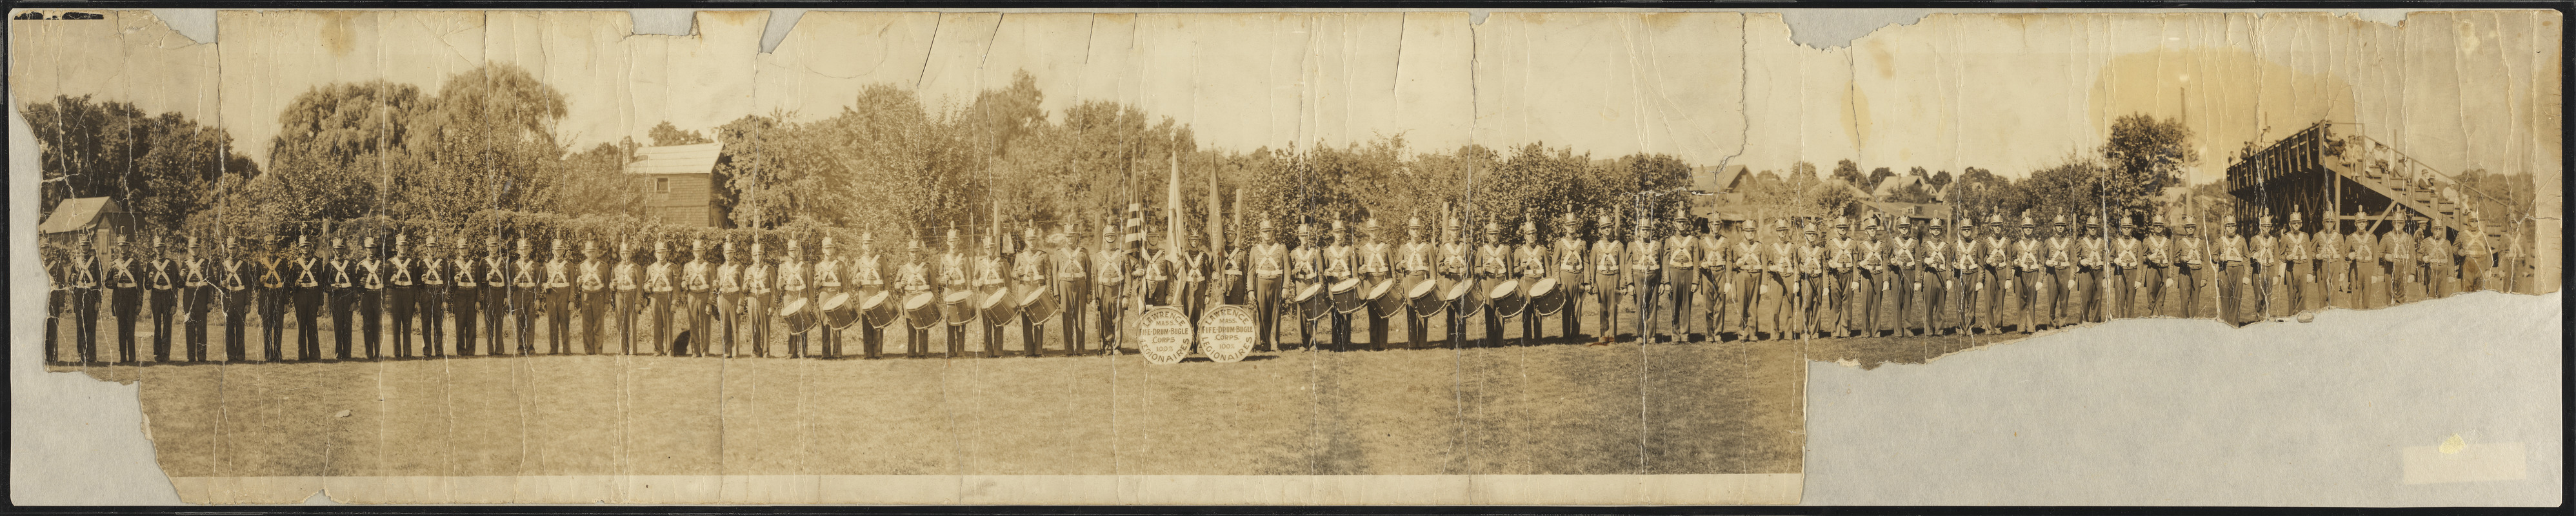 Lawrence, Mass. Fife-Drum-Bugle Corps, 100% legionaires